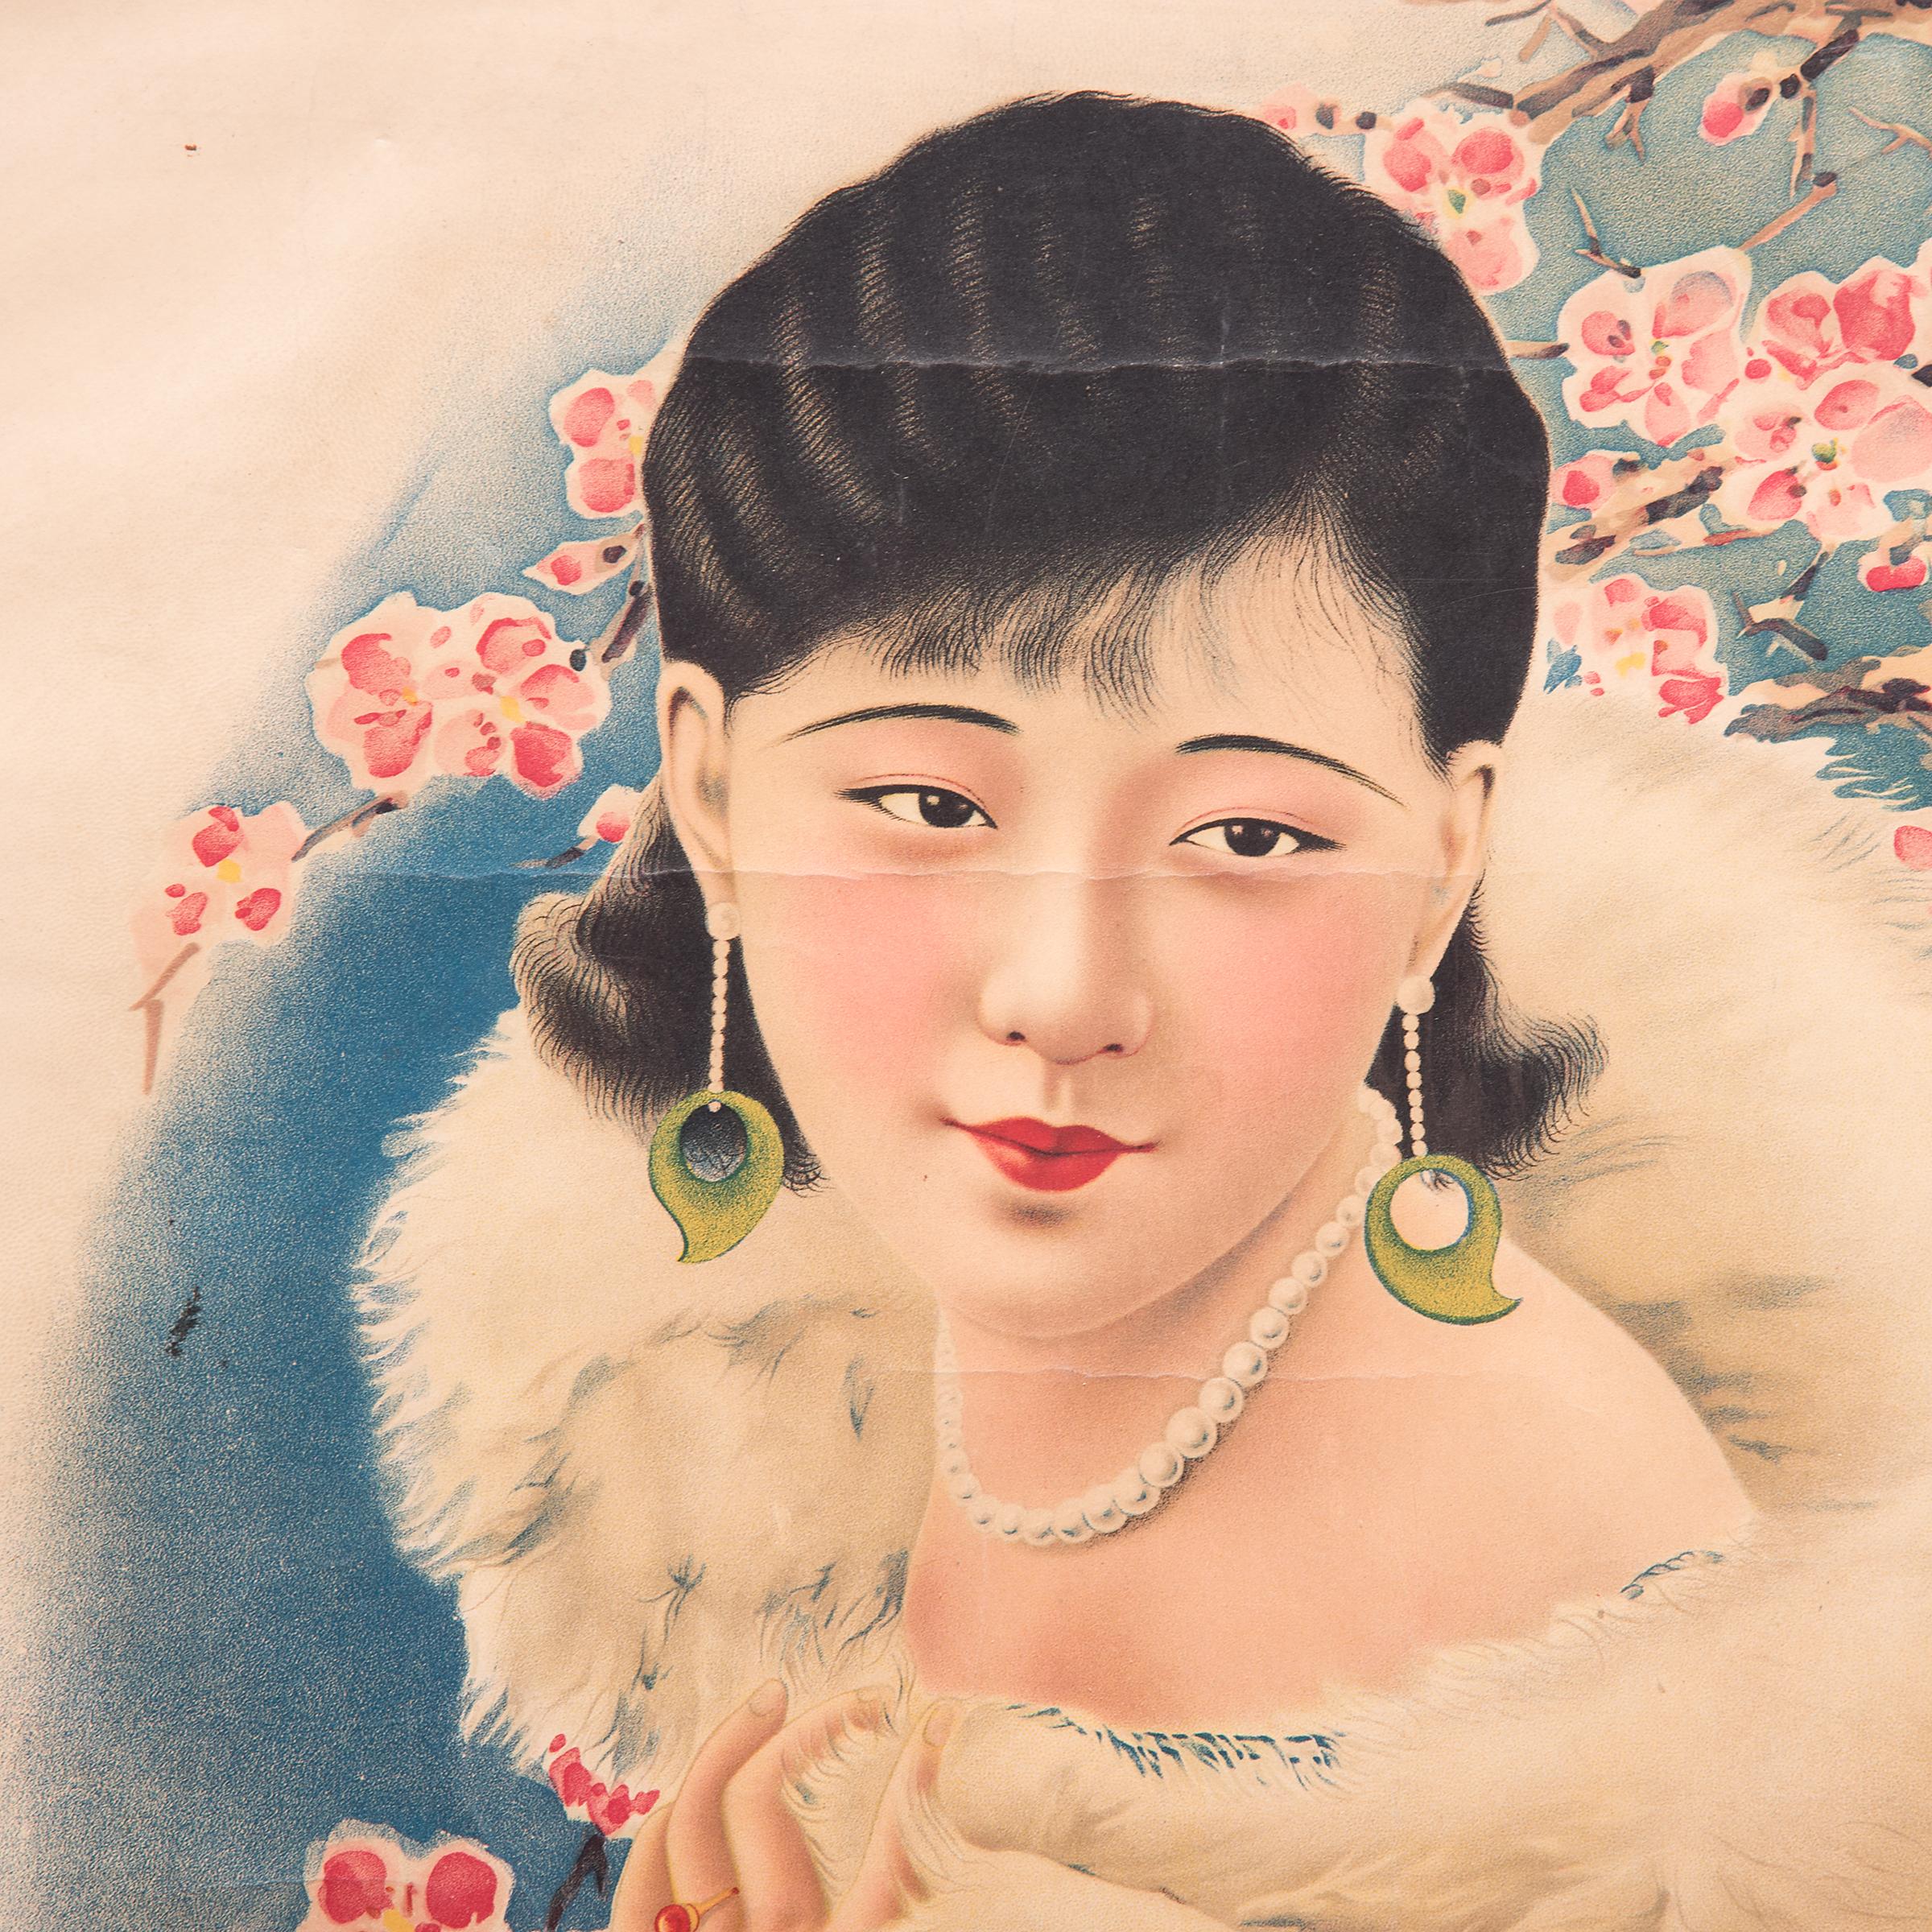 Vintage Chinese Advertisement Poster, c. 1930 - Print by Unknown